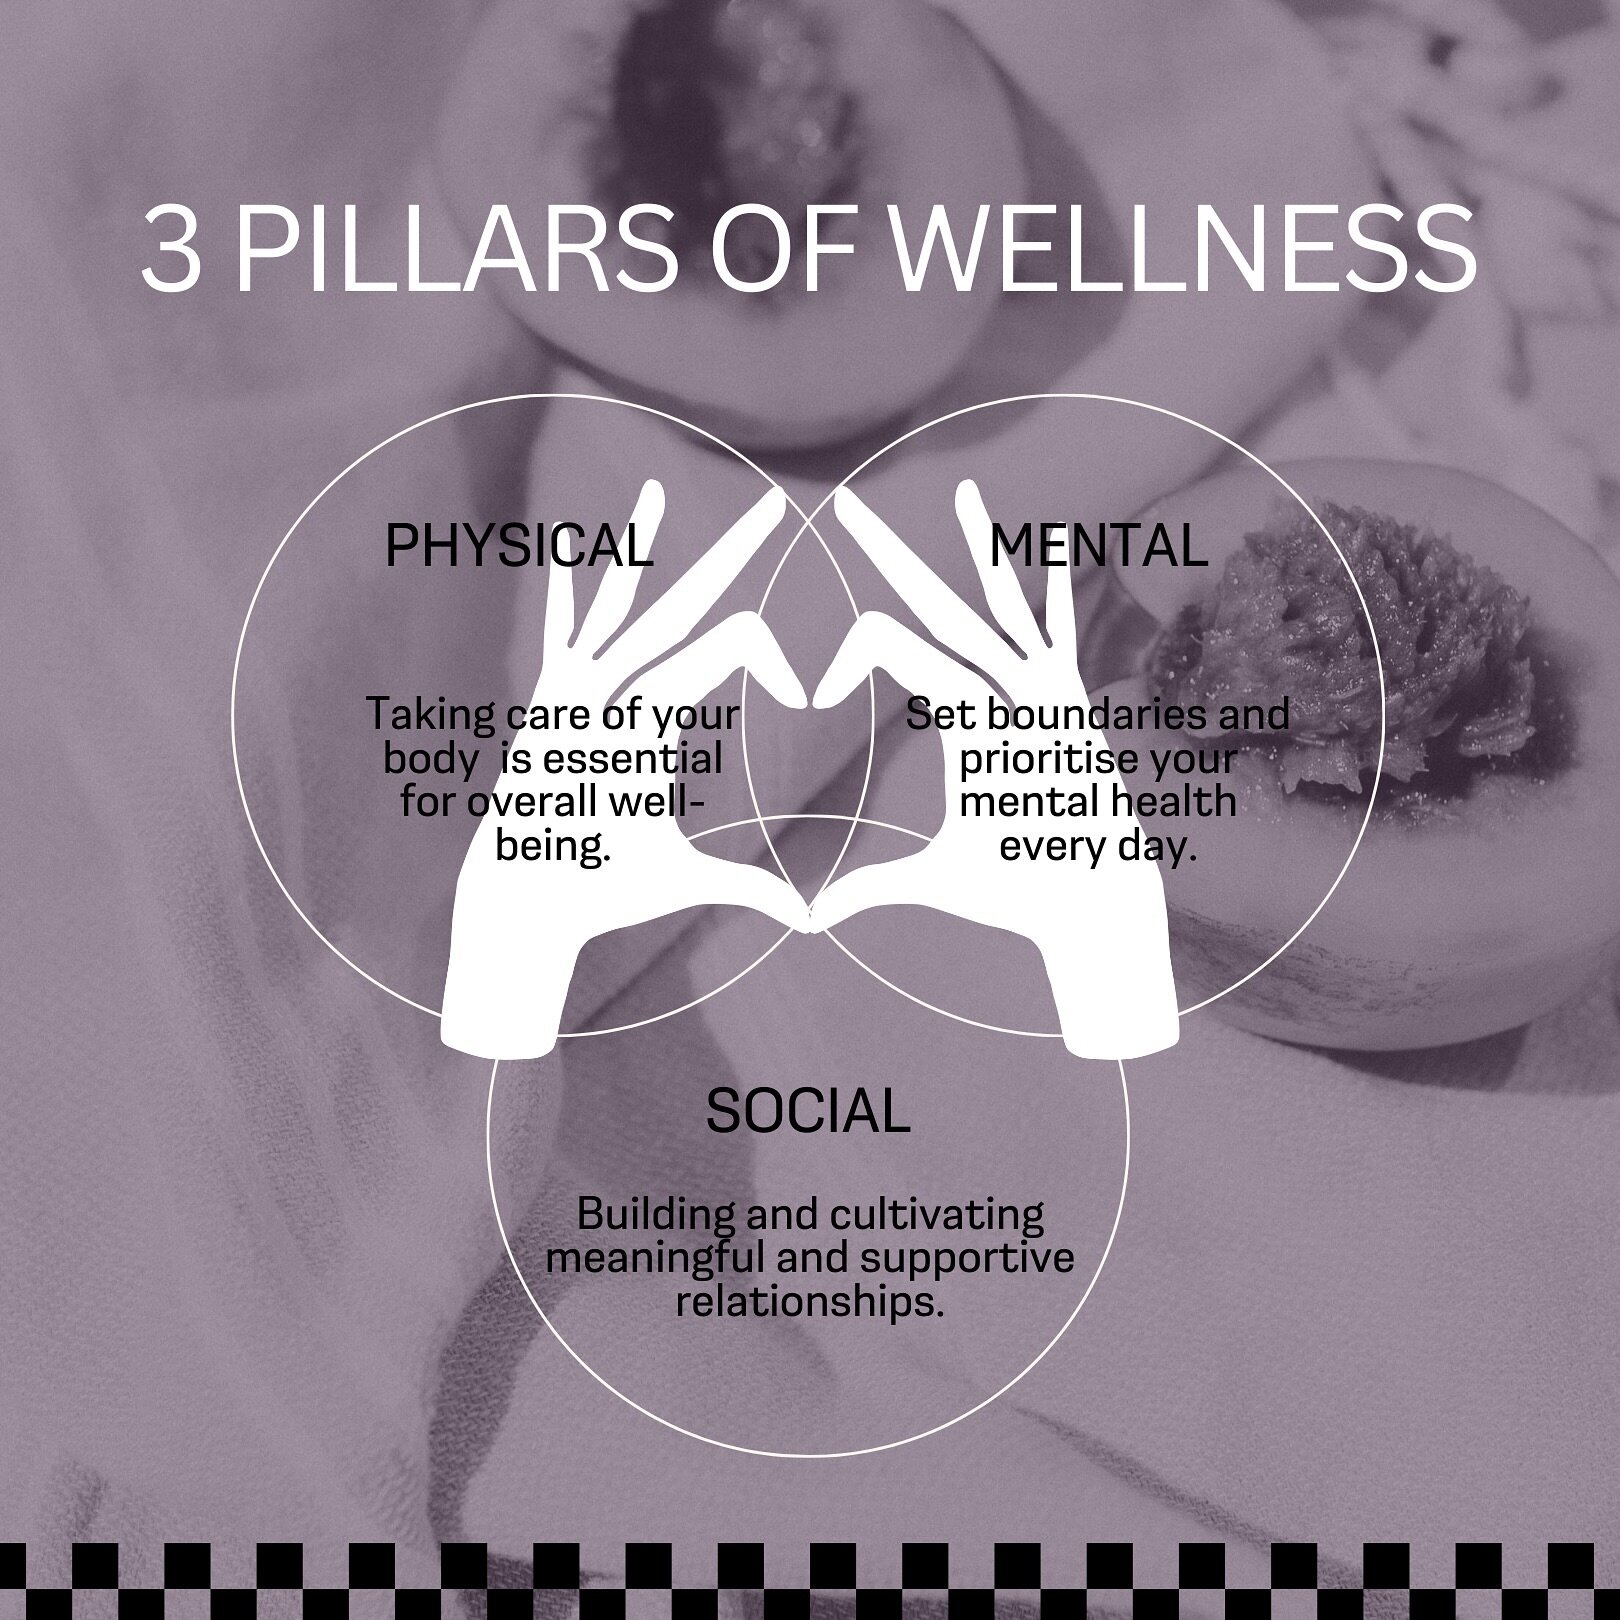 We should all be prioritising the three pillars of Wellness&hellip;..

* Physical 
* Mental
* Social 

By looking after and maintaining these three pillars of wellbeing, we can experience:

* Improved quality of life
* Increased productivity
* Enhanc